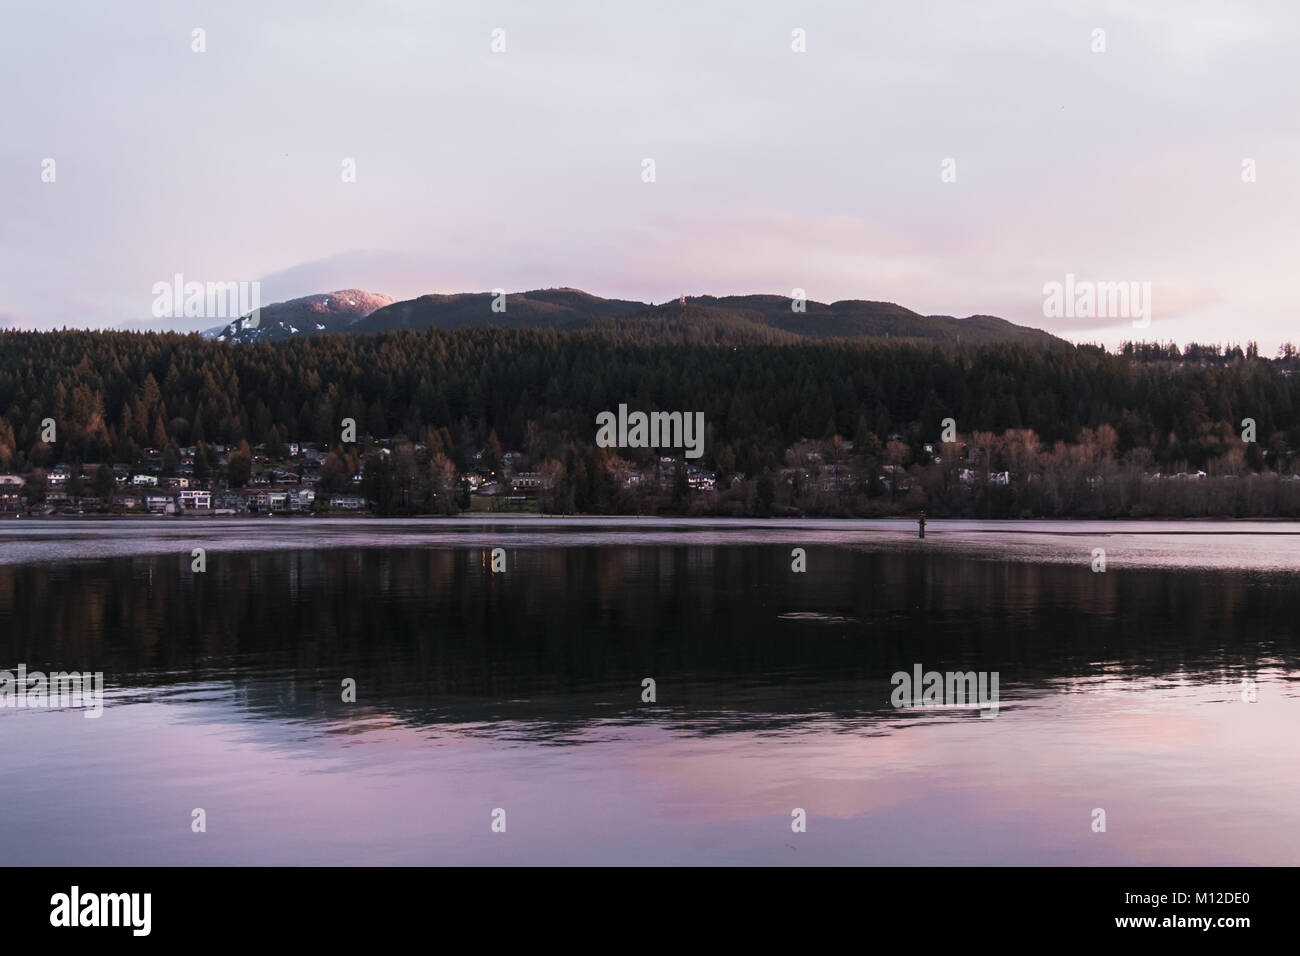 View at Rocky Point Park, Port Moody, Vancouver, British Columbia, Canada a Couple Minutes after Sunrise Stock Photo